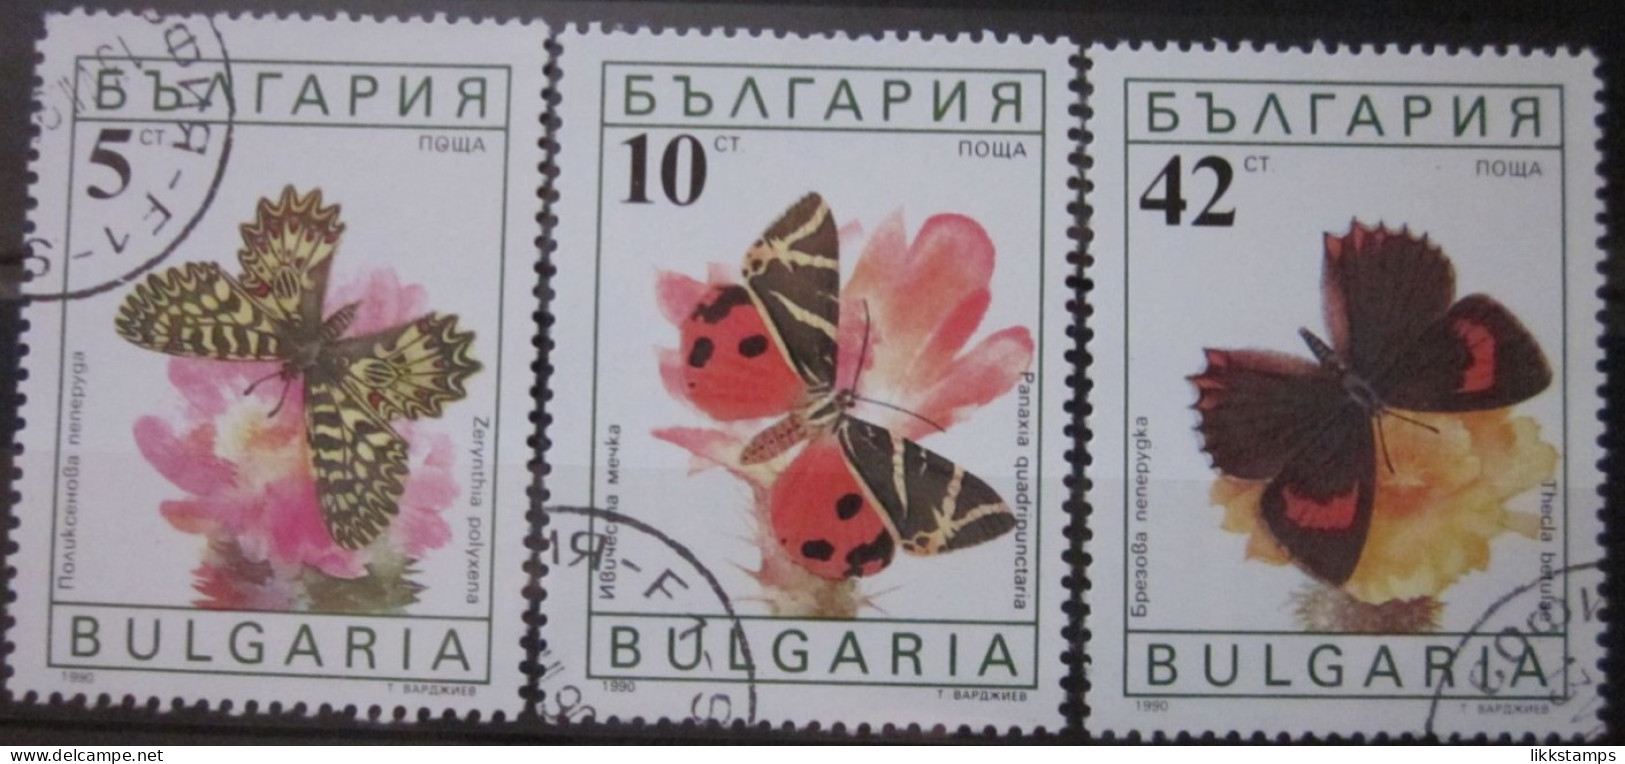 BULGARIA 1990 ~ S.G. 3699, 3700 & 3703, ~ BUTTERFLIES AND MOTHS. ~  VFU #02959 - Used Stamps